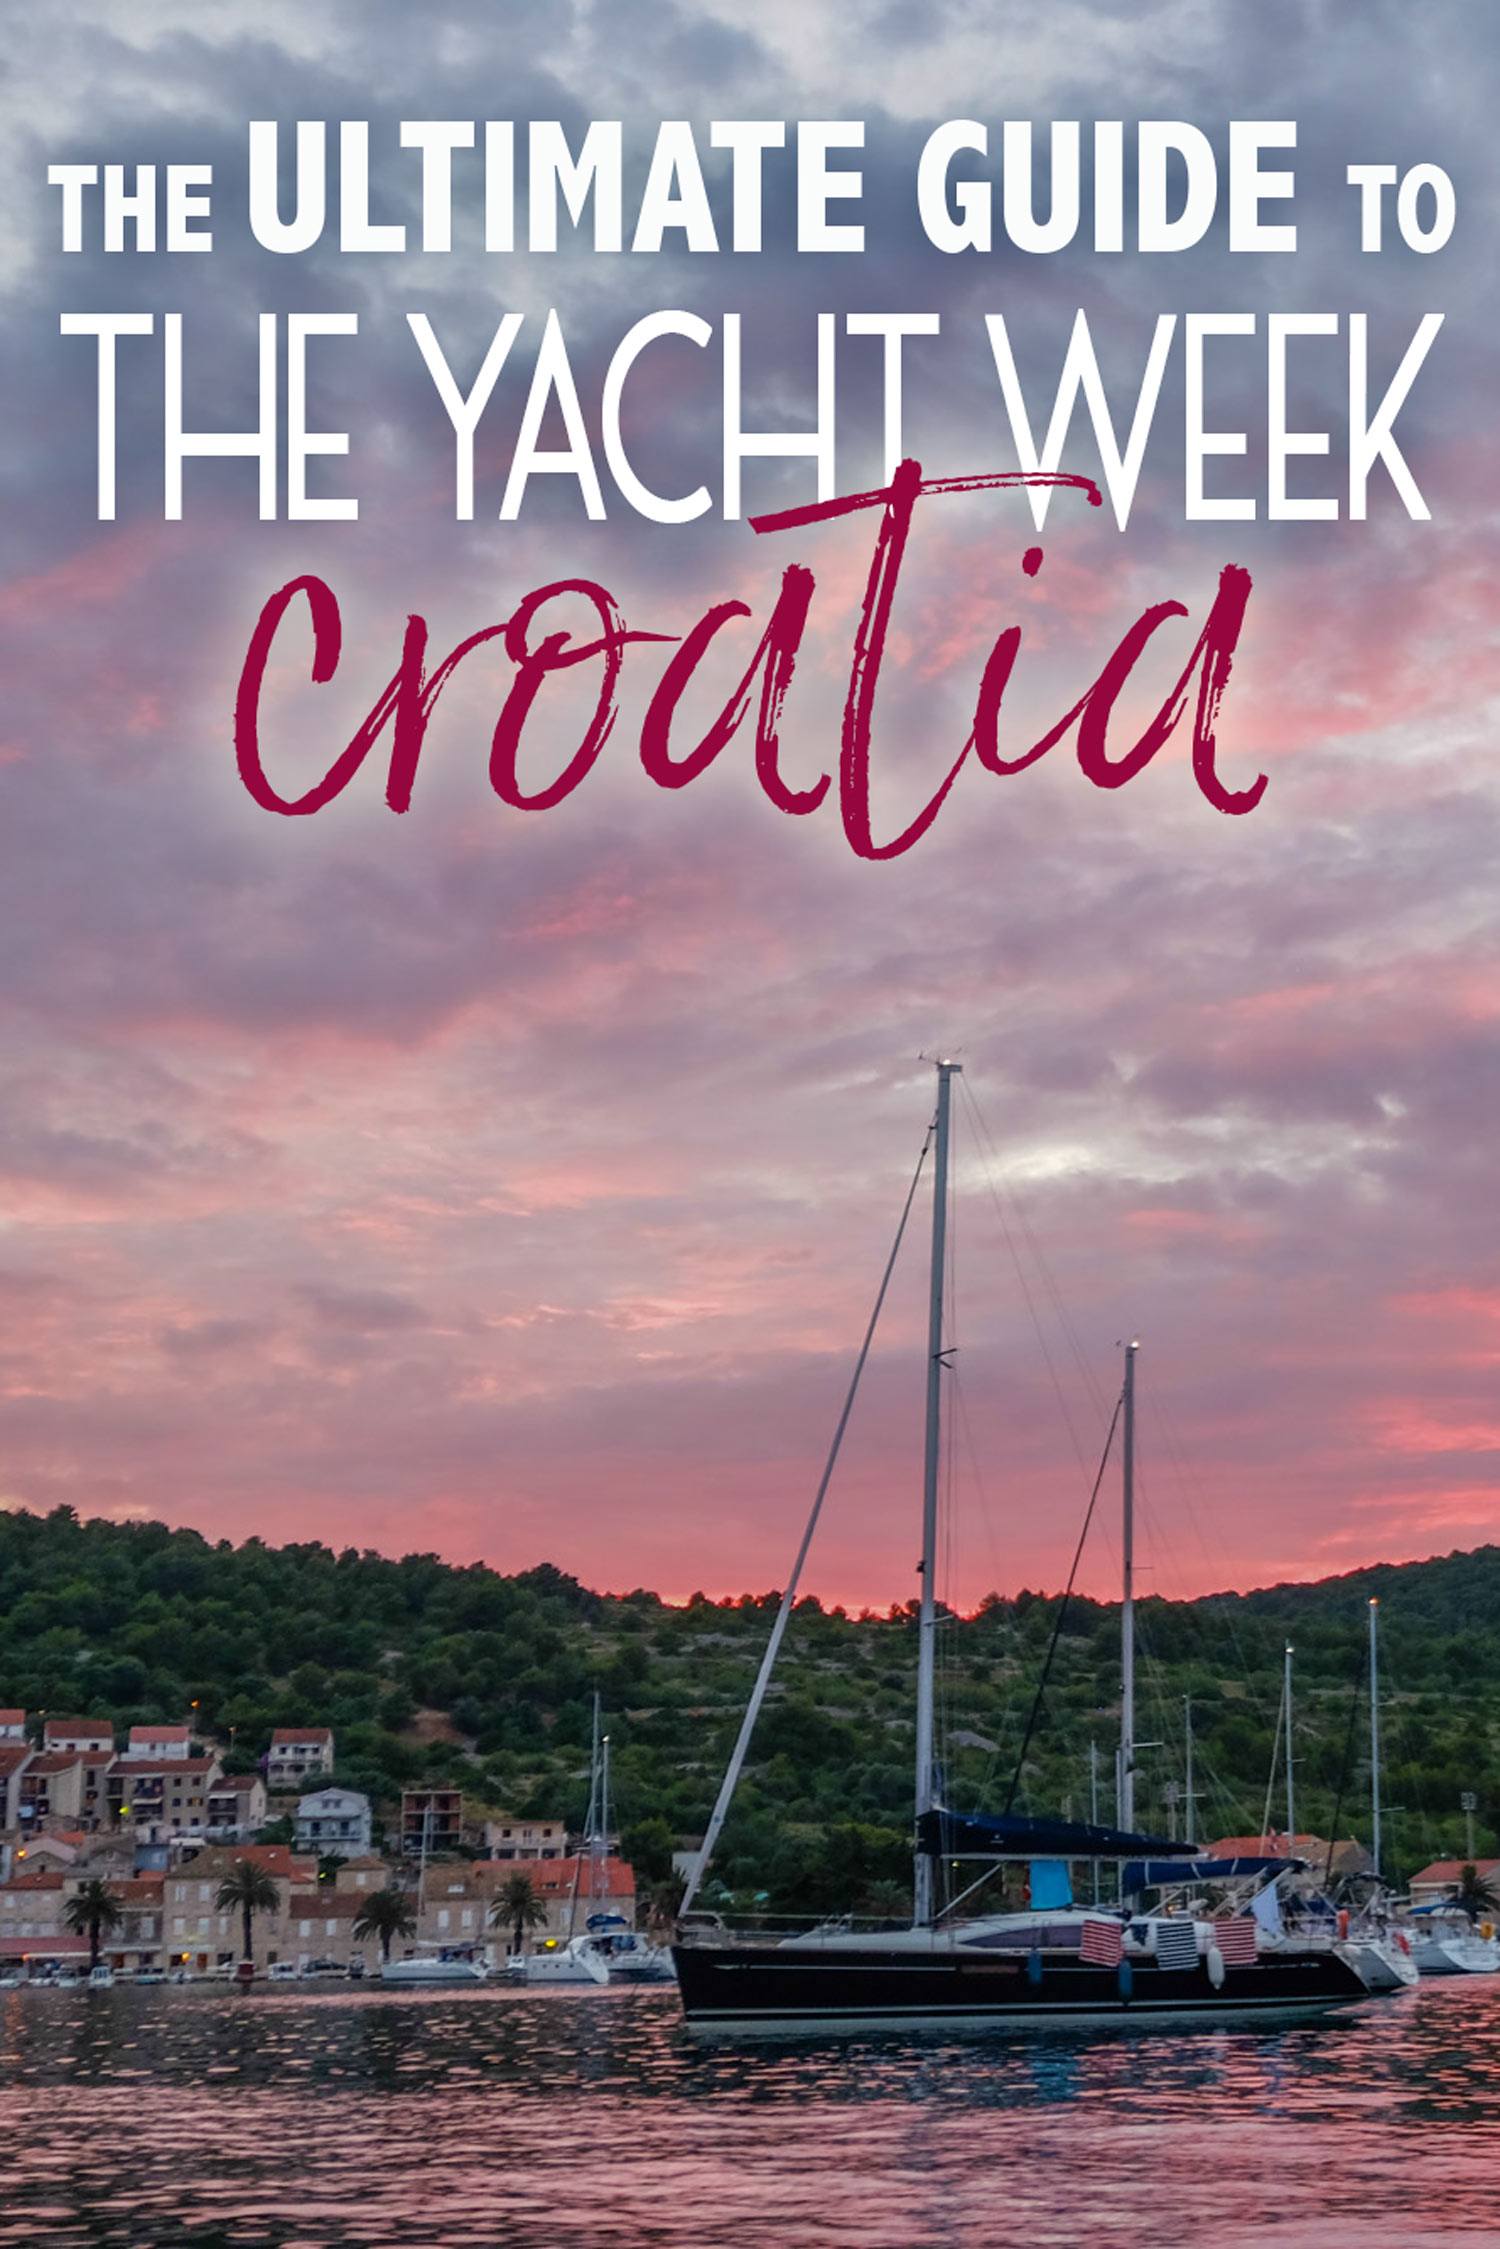 The Ultimate Guide to The Yacht Week Croatia